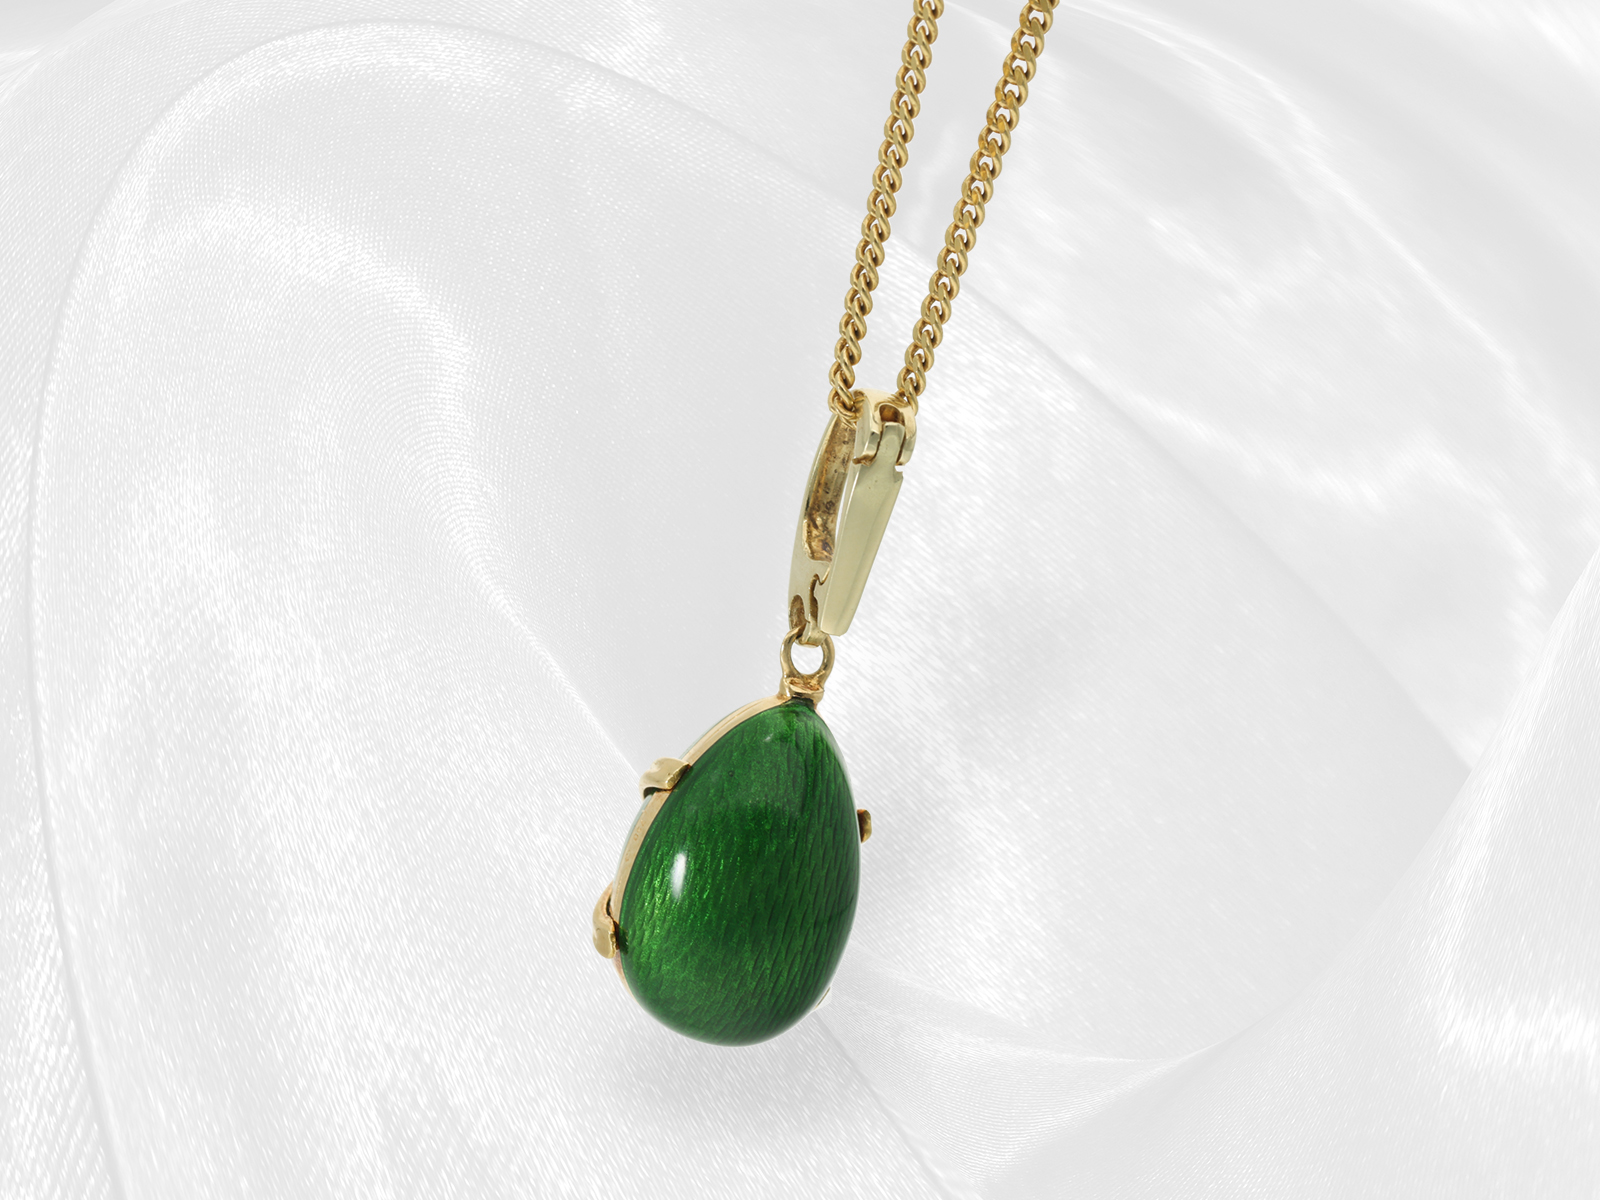 High-quality Fabergé enamel pendant with brilliant-cut diamonds, 18K gold, limited edition, with nec - Image 5 of 12